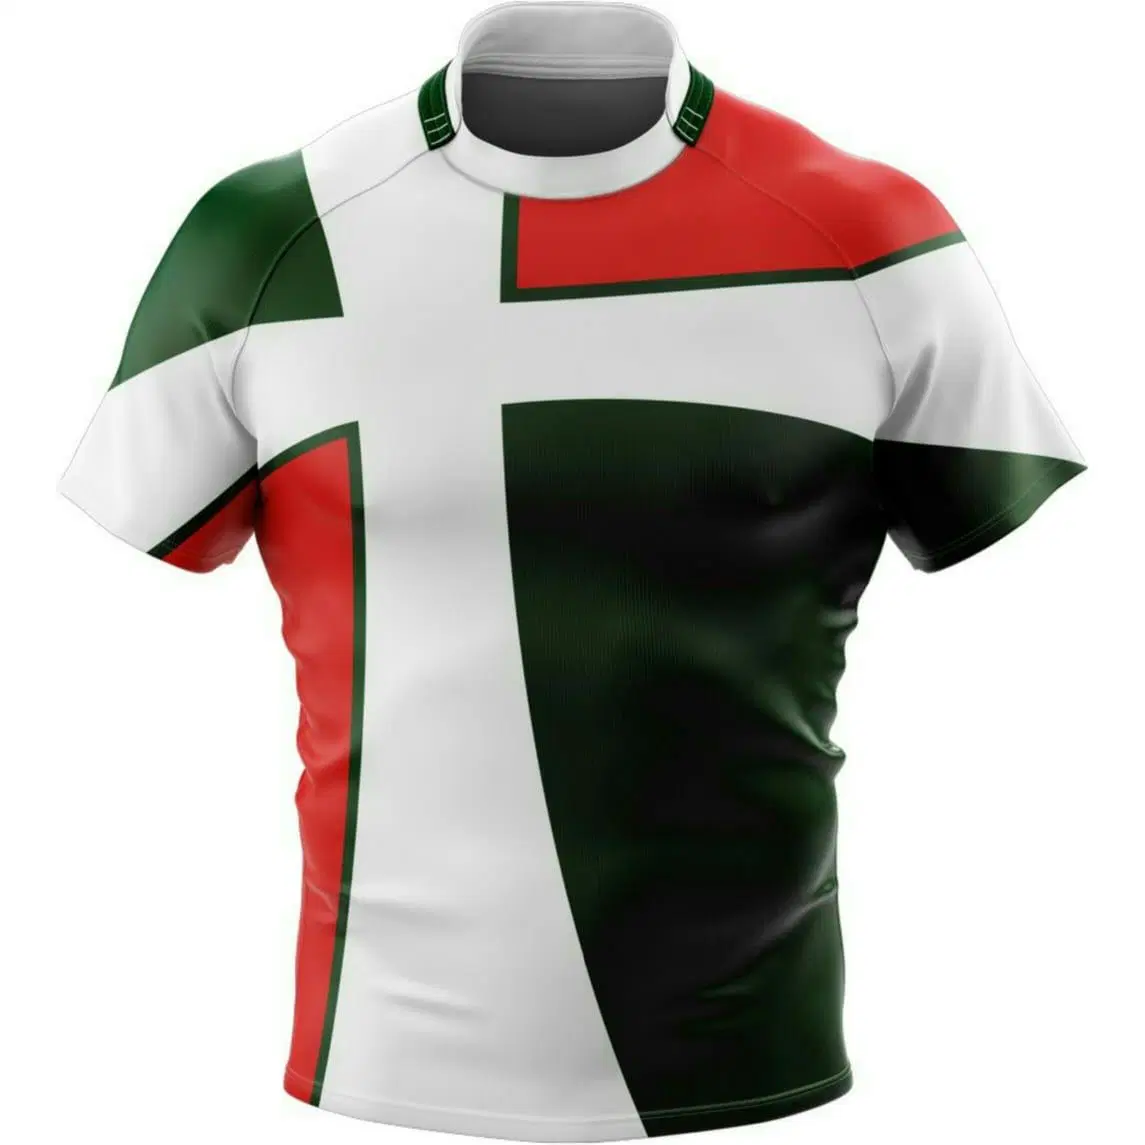 Sports Goods Custom Best Sublimation Rugby Jersey Rugby Football Wear Shirts & Tops Sportswear for Unisex Adults